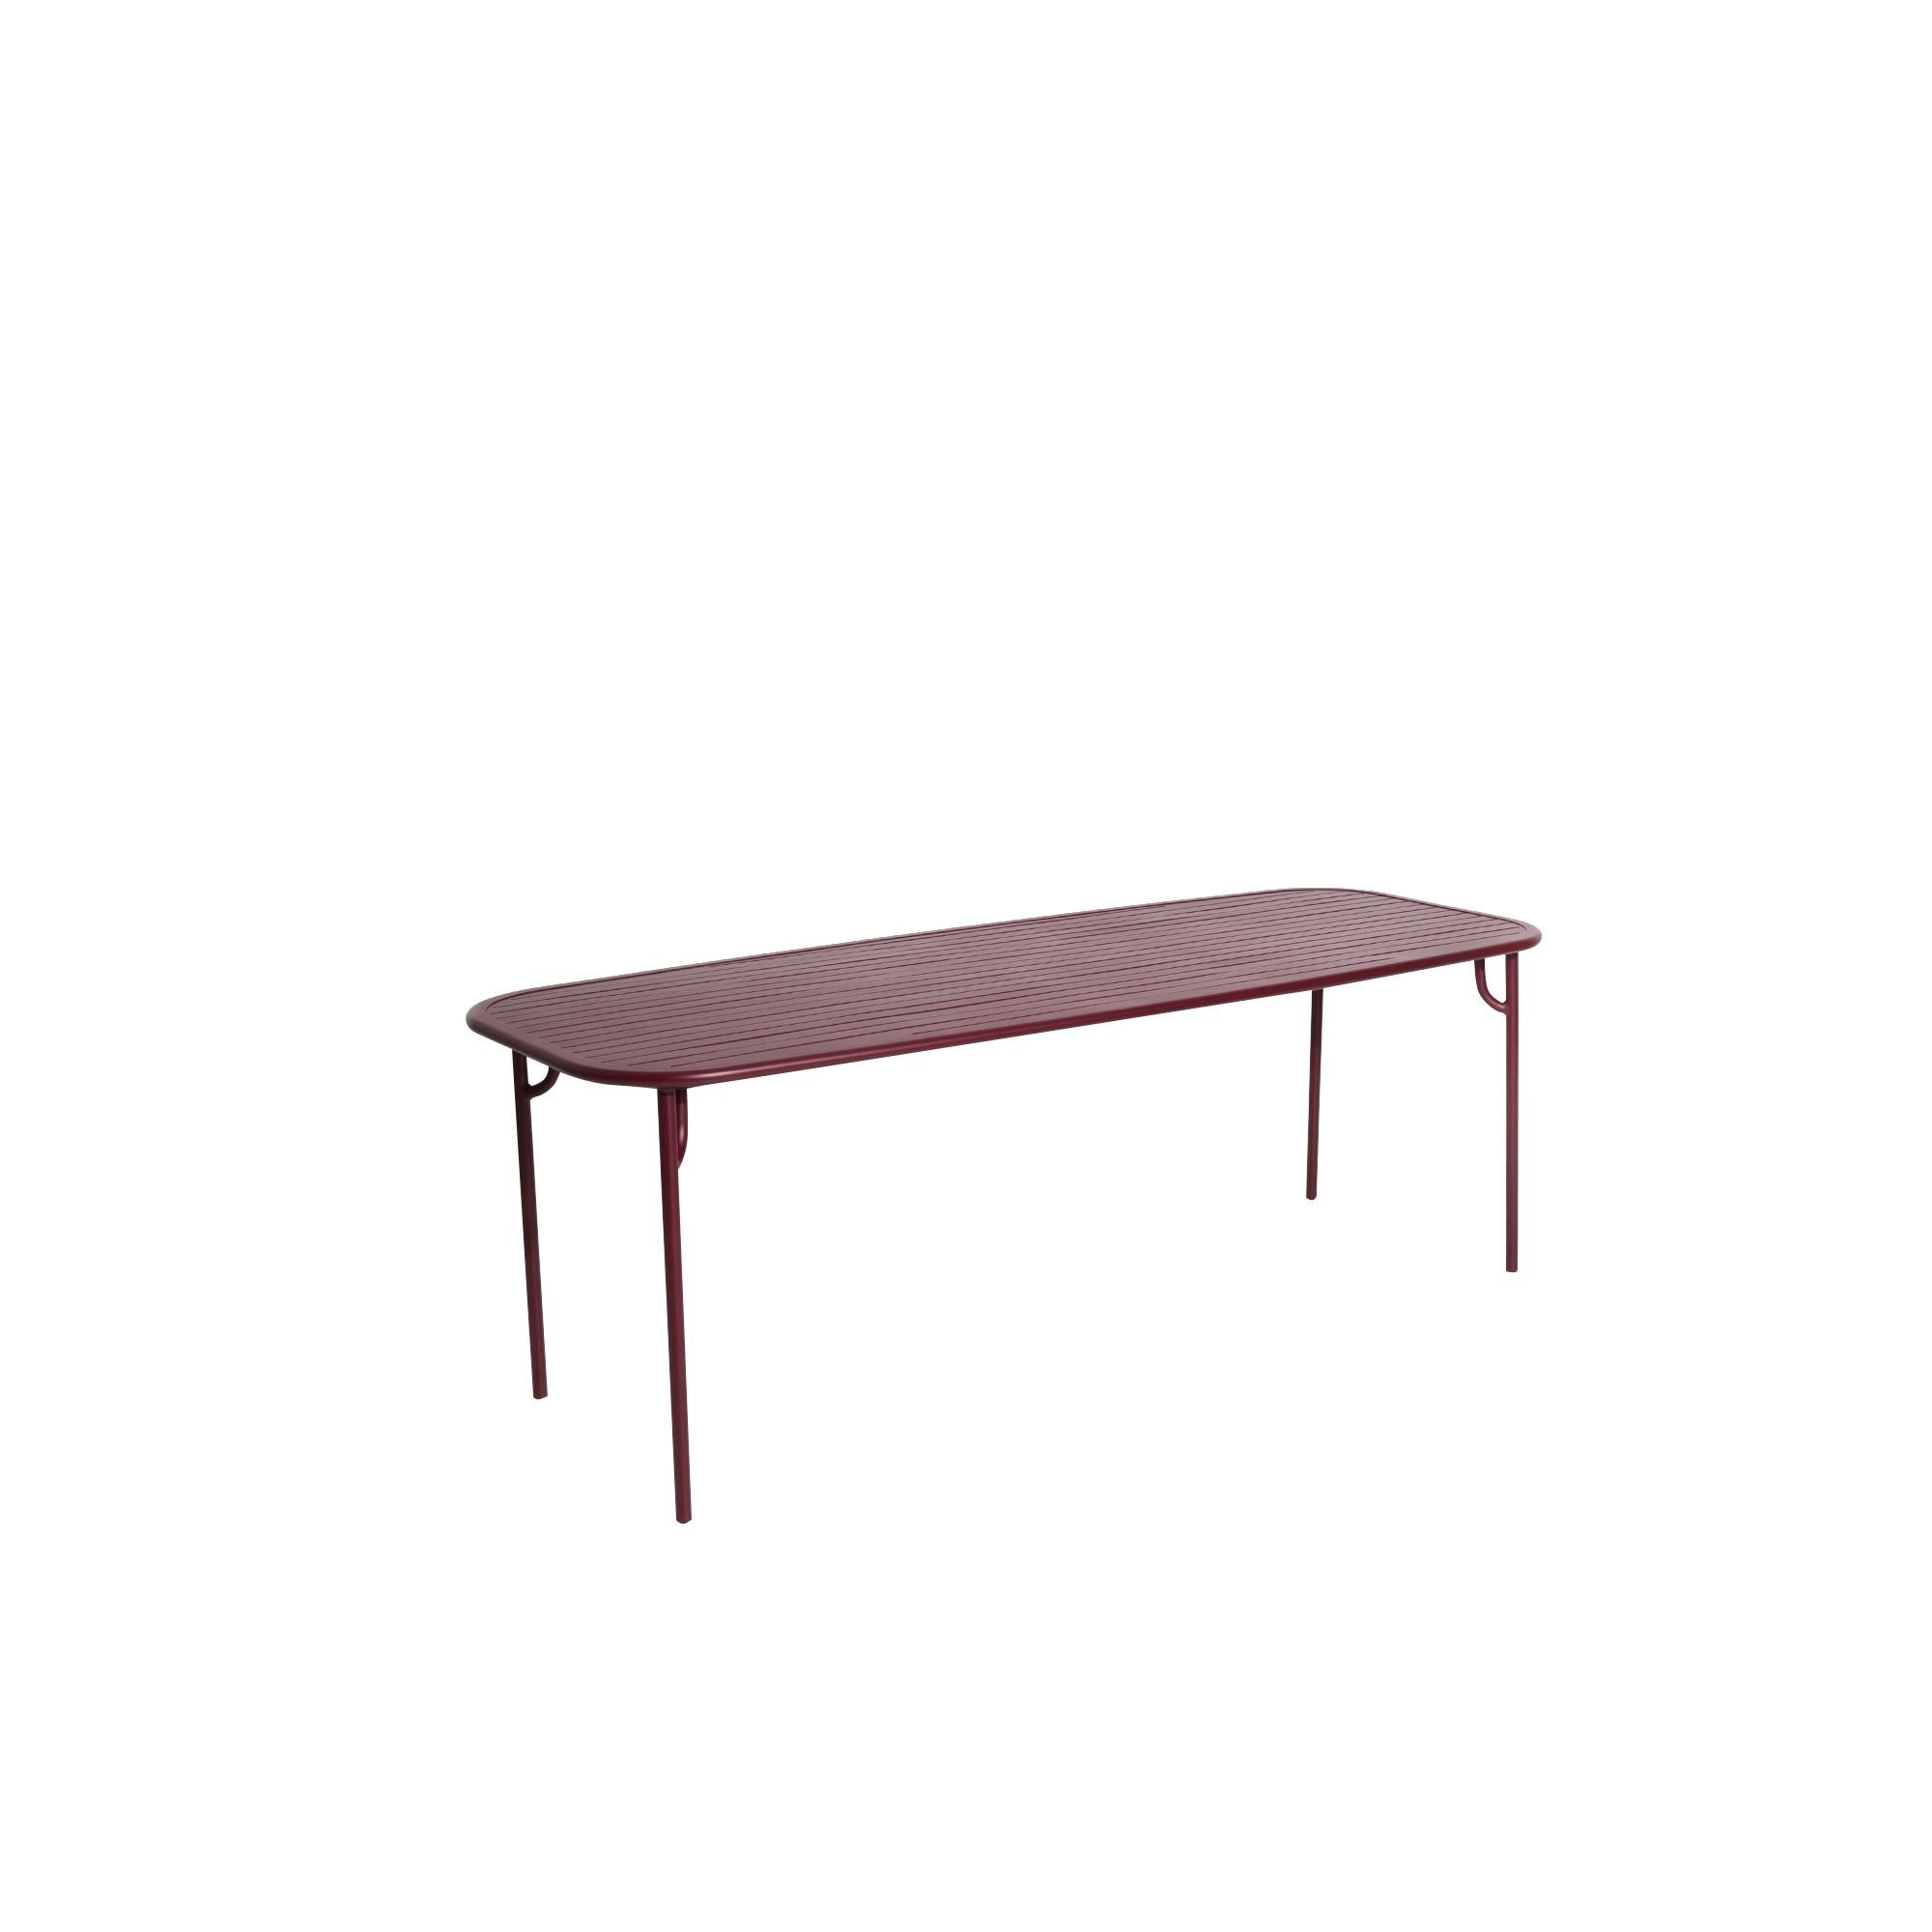 Petite Friture Week-End Large Rectangular Dining Table in Burgundy Aluminium with Slats by Studio BrichetZiegler, 2017

The week-end collection is a full range of outdoor furniture, in aluminium grained epoxy paint, matt finish, that includes 18